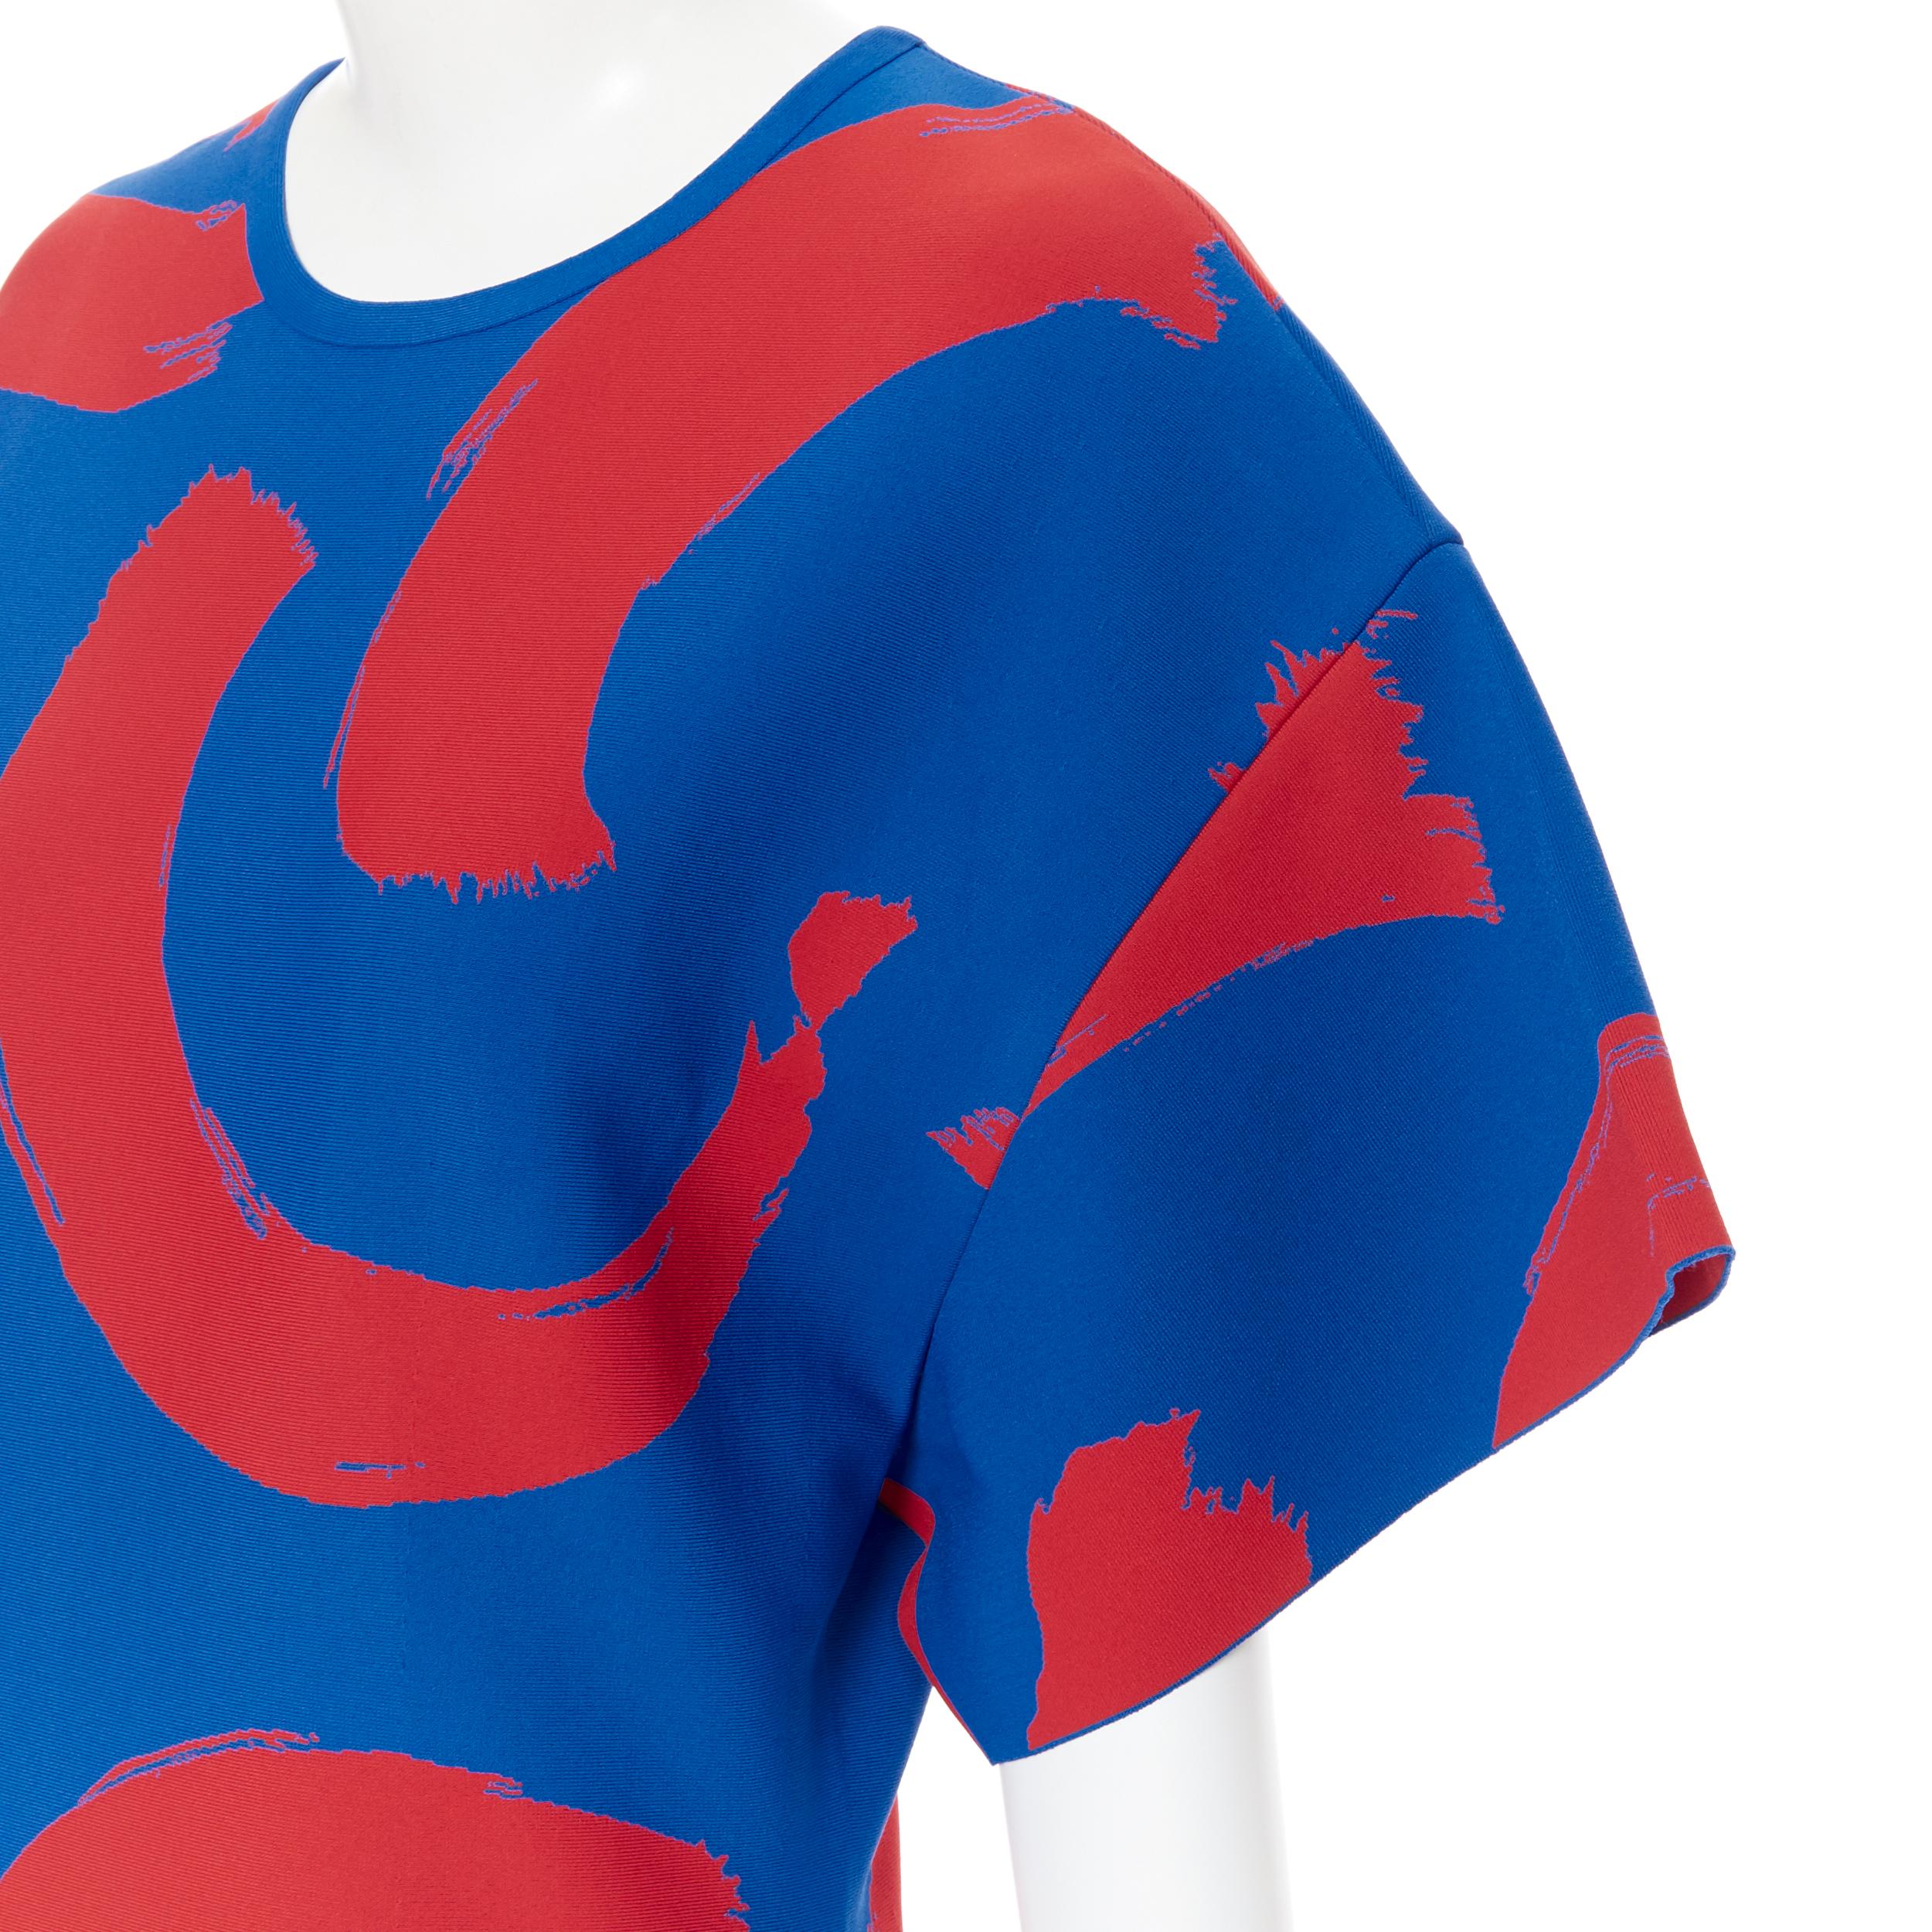 runway OLD CELINE SS14 red blue pop brush stroke oversized tunic tunic top L
Brand: Celine
Designer: Phoebe Philo
Collection: SS15
Model Name / Style: Oversized top
Material: Viscose, polyester
Color: Blue, red
Pattern: Abstract
Extra Detail: